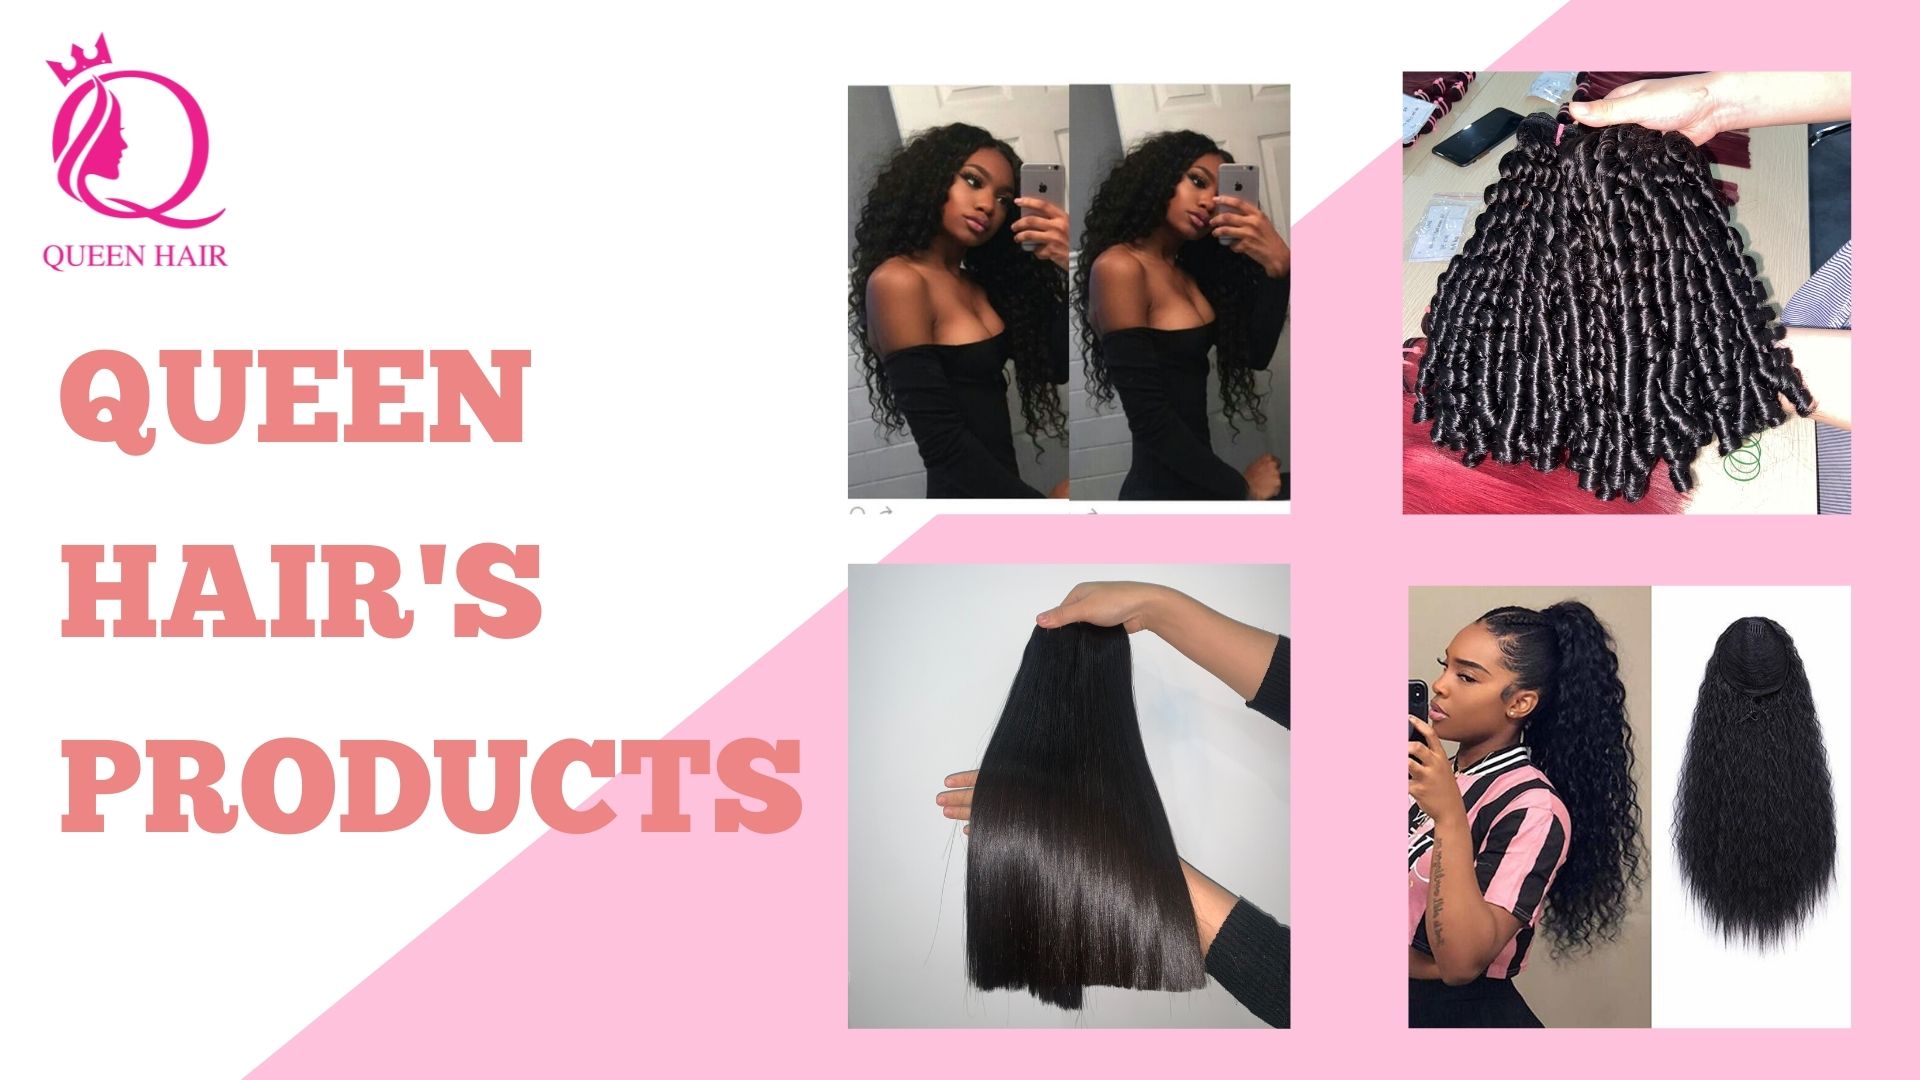 Queen Hair's products 